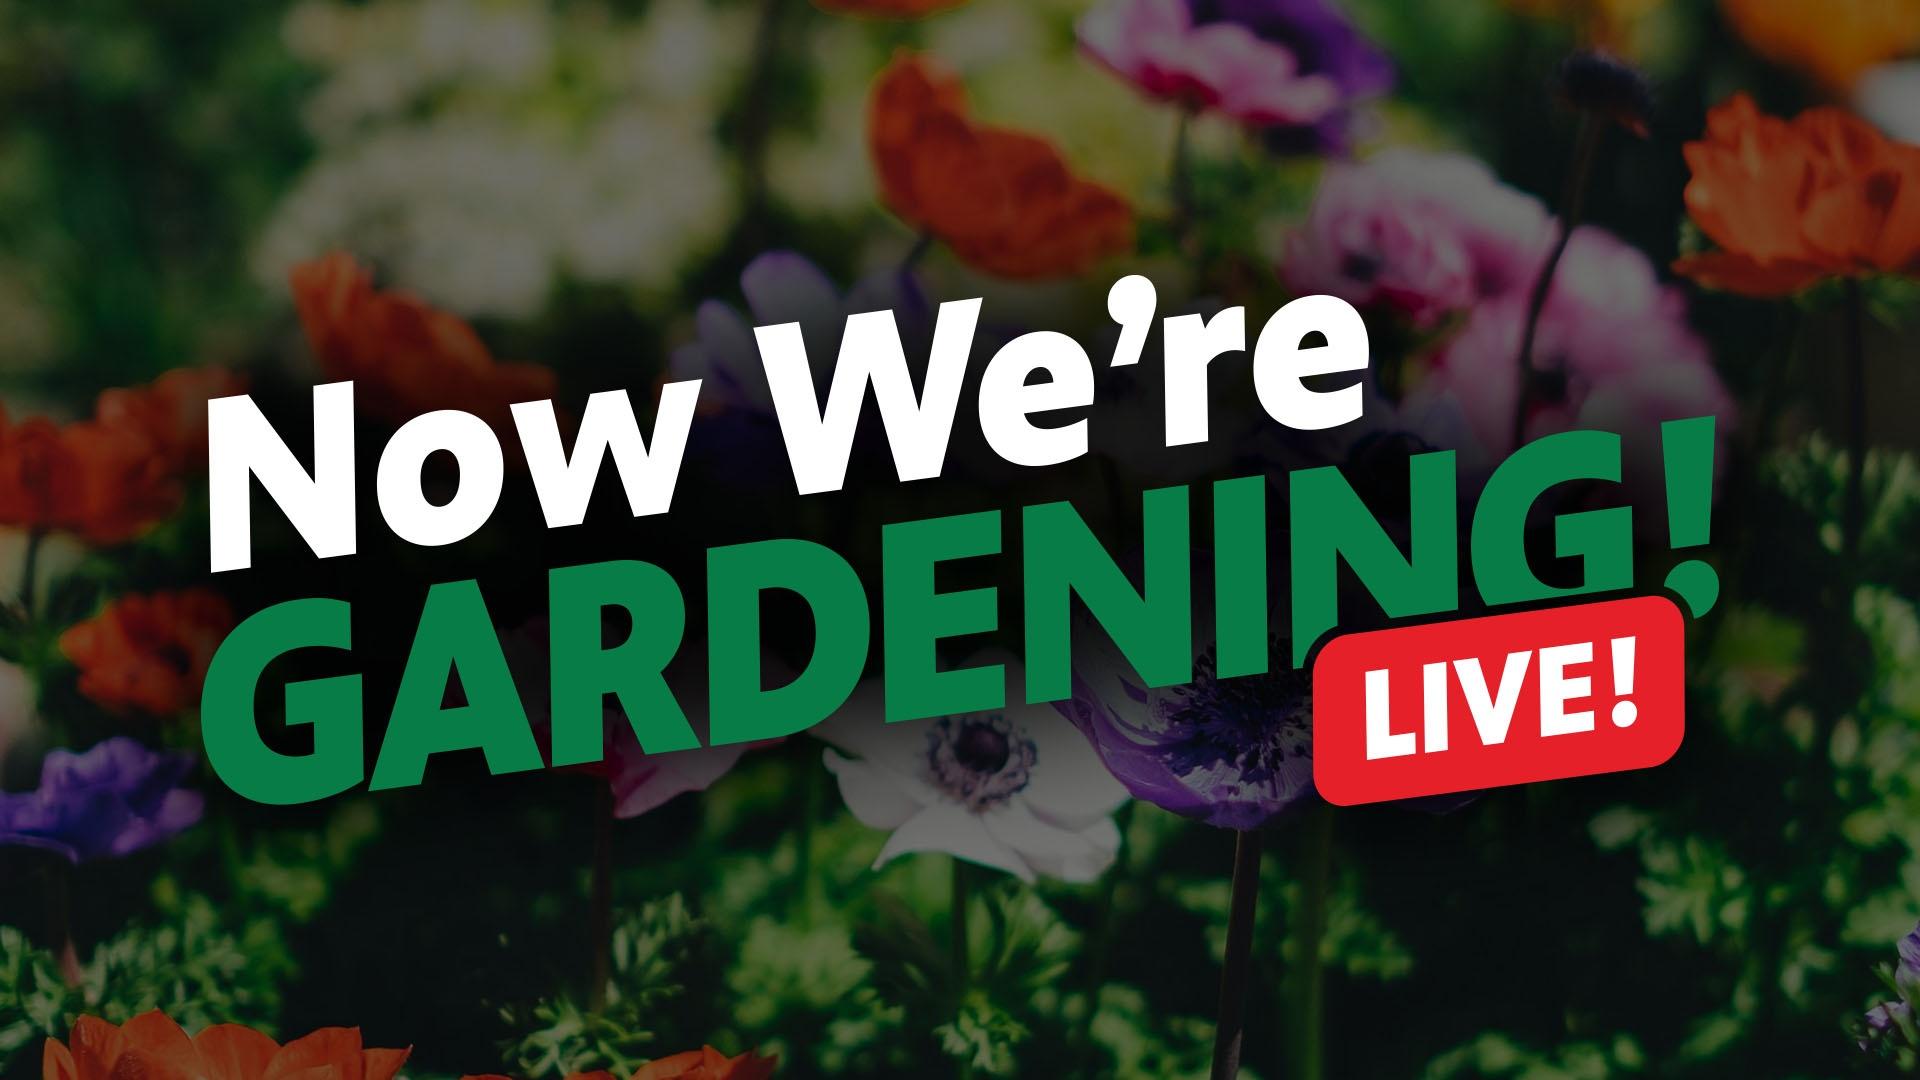 Now We're Gardening LIVE! logo over a photo of flowers